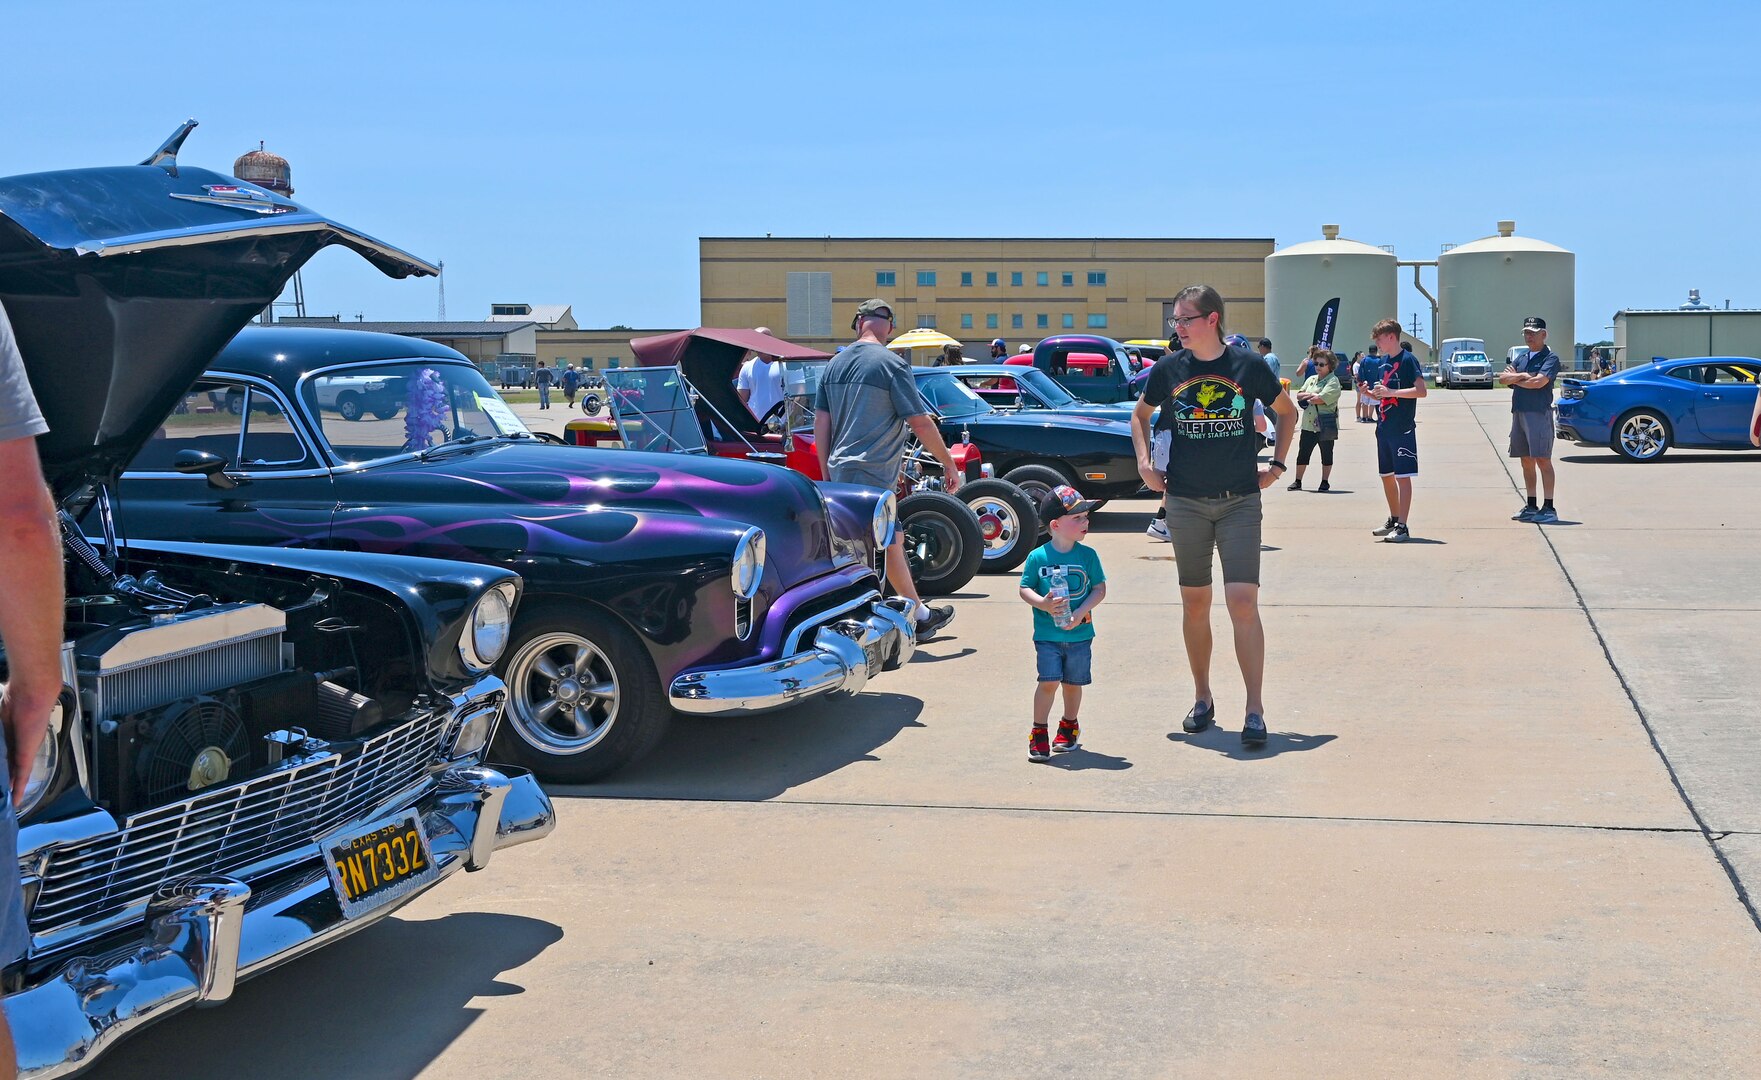 Reserve Citizen Airmen and their families enjoy a car show at the 2022 433rd Airlift Wing Family Day May 15, 2022, at Joint Base San Antonio-Lackland, Texas. This was the first family day event since 2019, due to the COVID-19 pandemic. (U.S. Air Force photo by Kristian Carter)